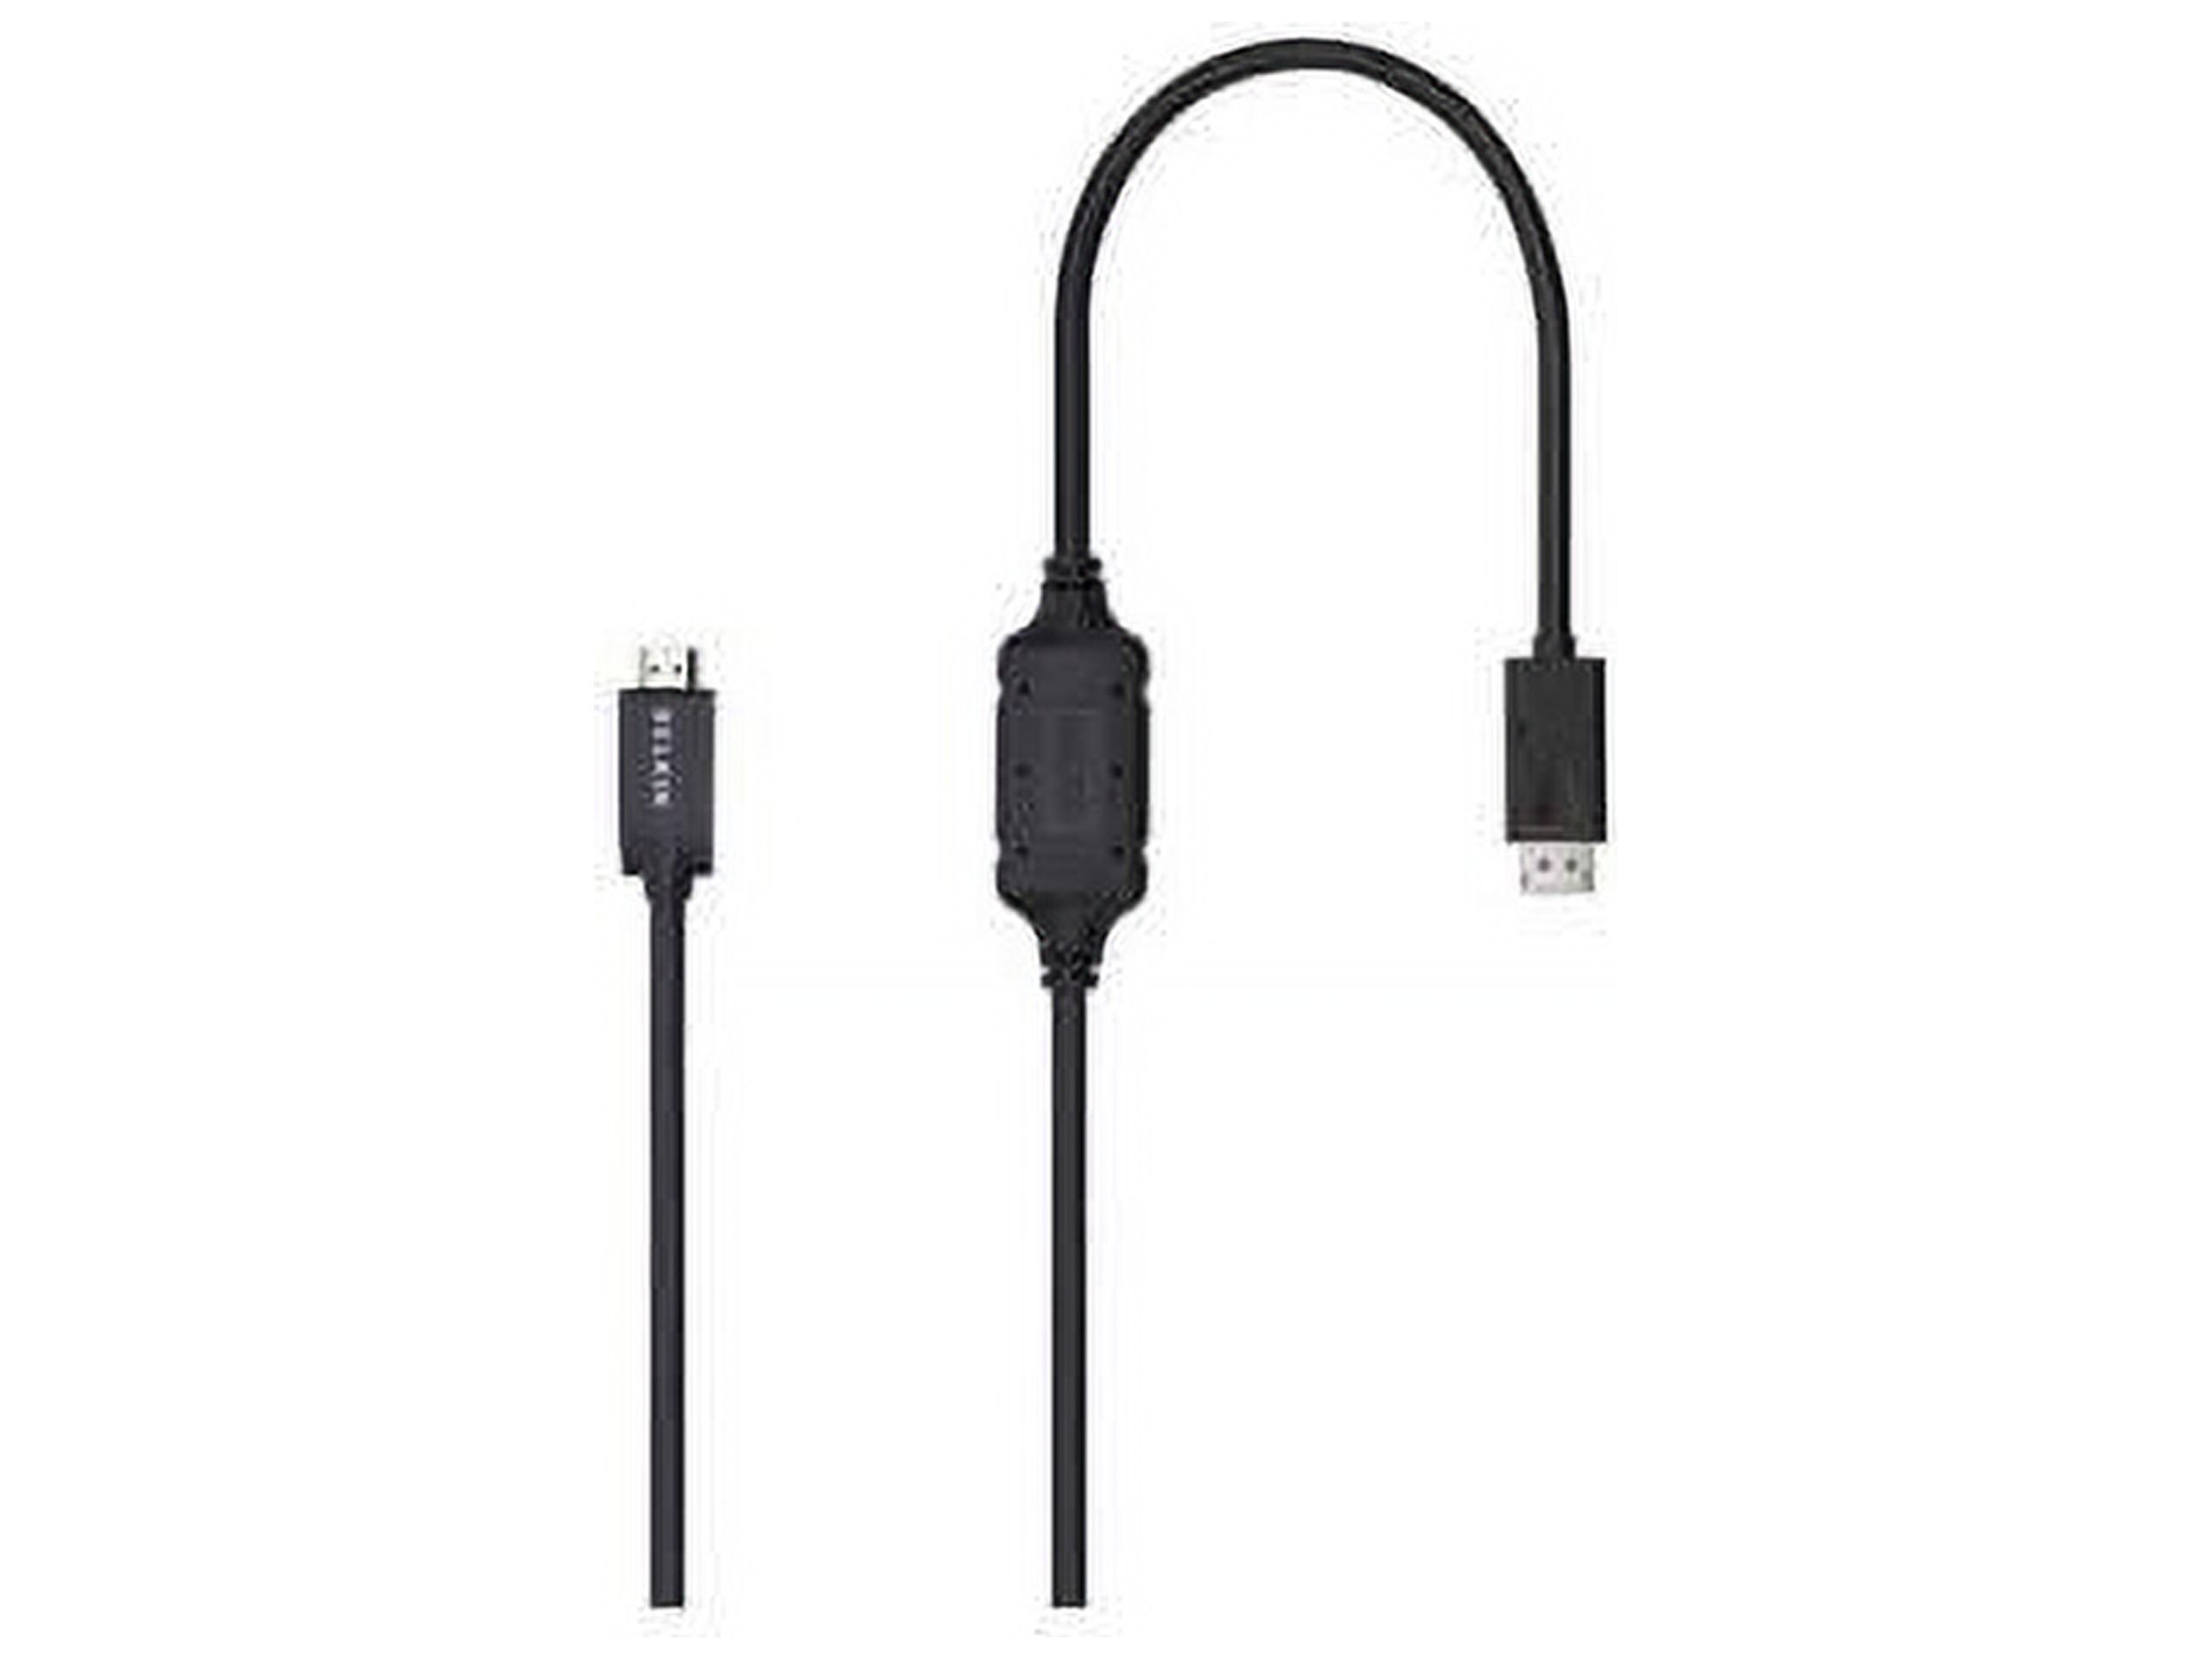 BELKIN PURE AV F2CD001B06-E 6 feet Black DisplayPort-Male to HDMI-Male Cable Male to Male - image 1 of 2